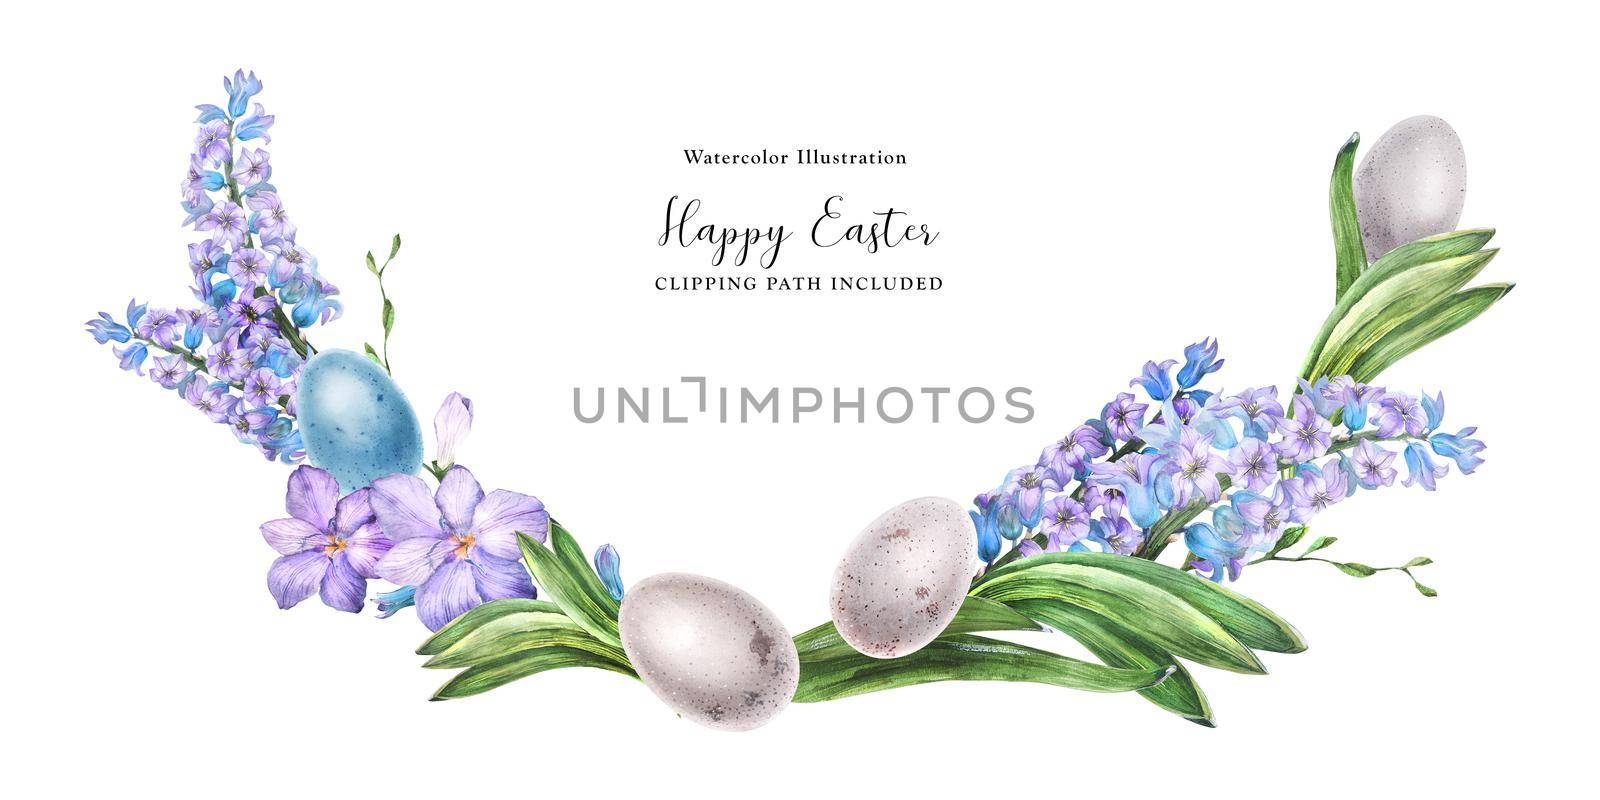 Hyachinth and bird egg watercolor arc on a white background, clipping path included